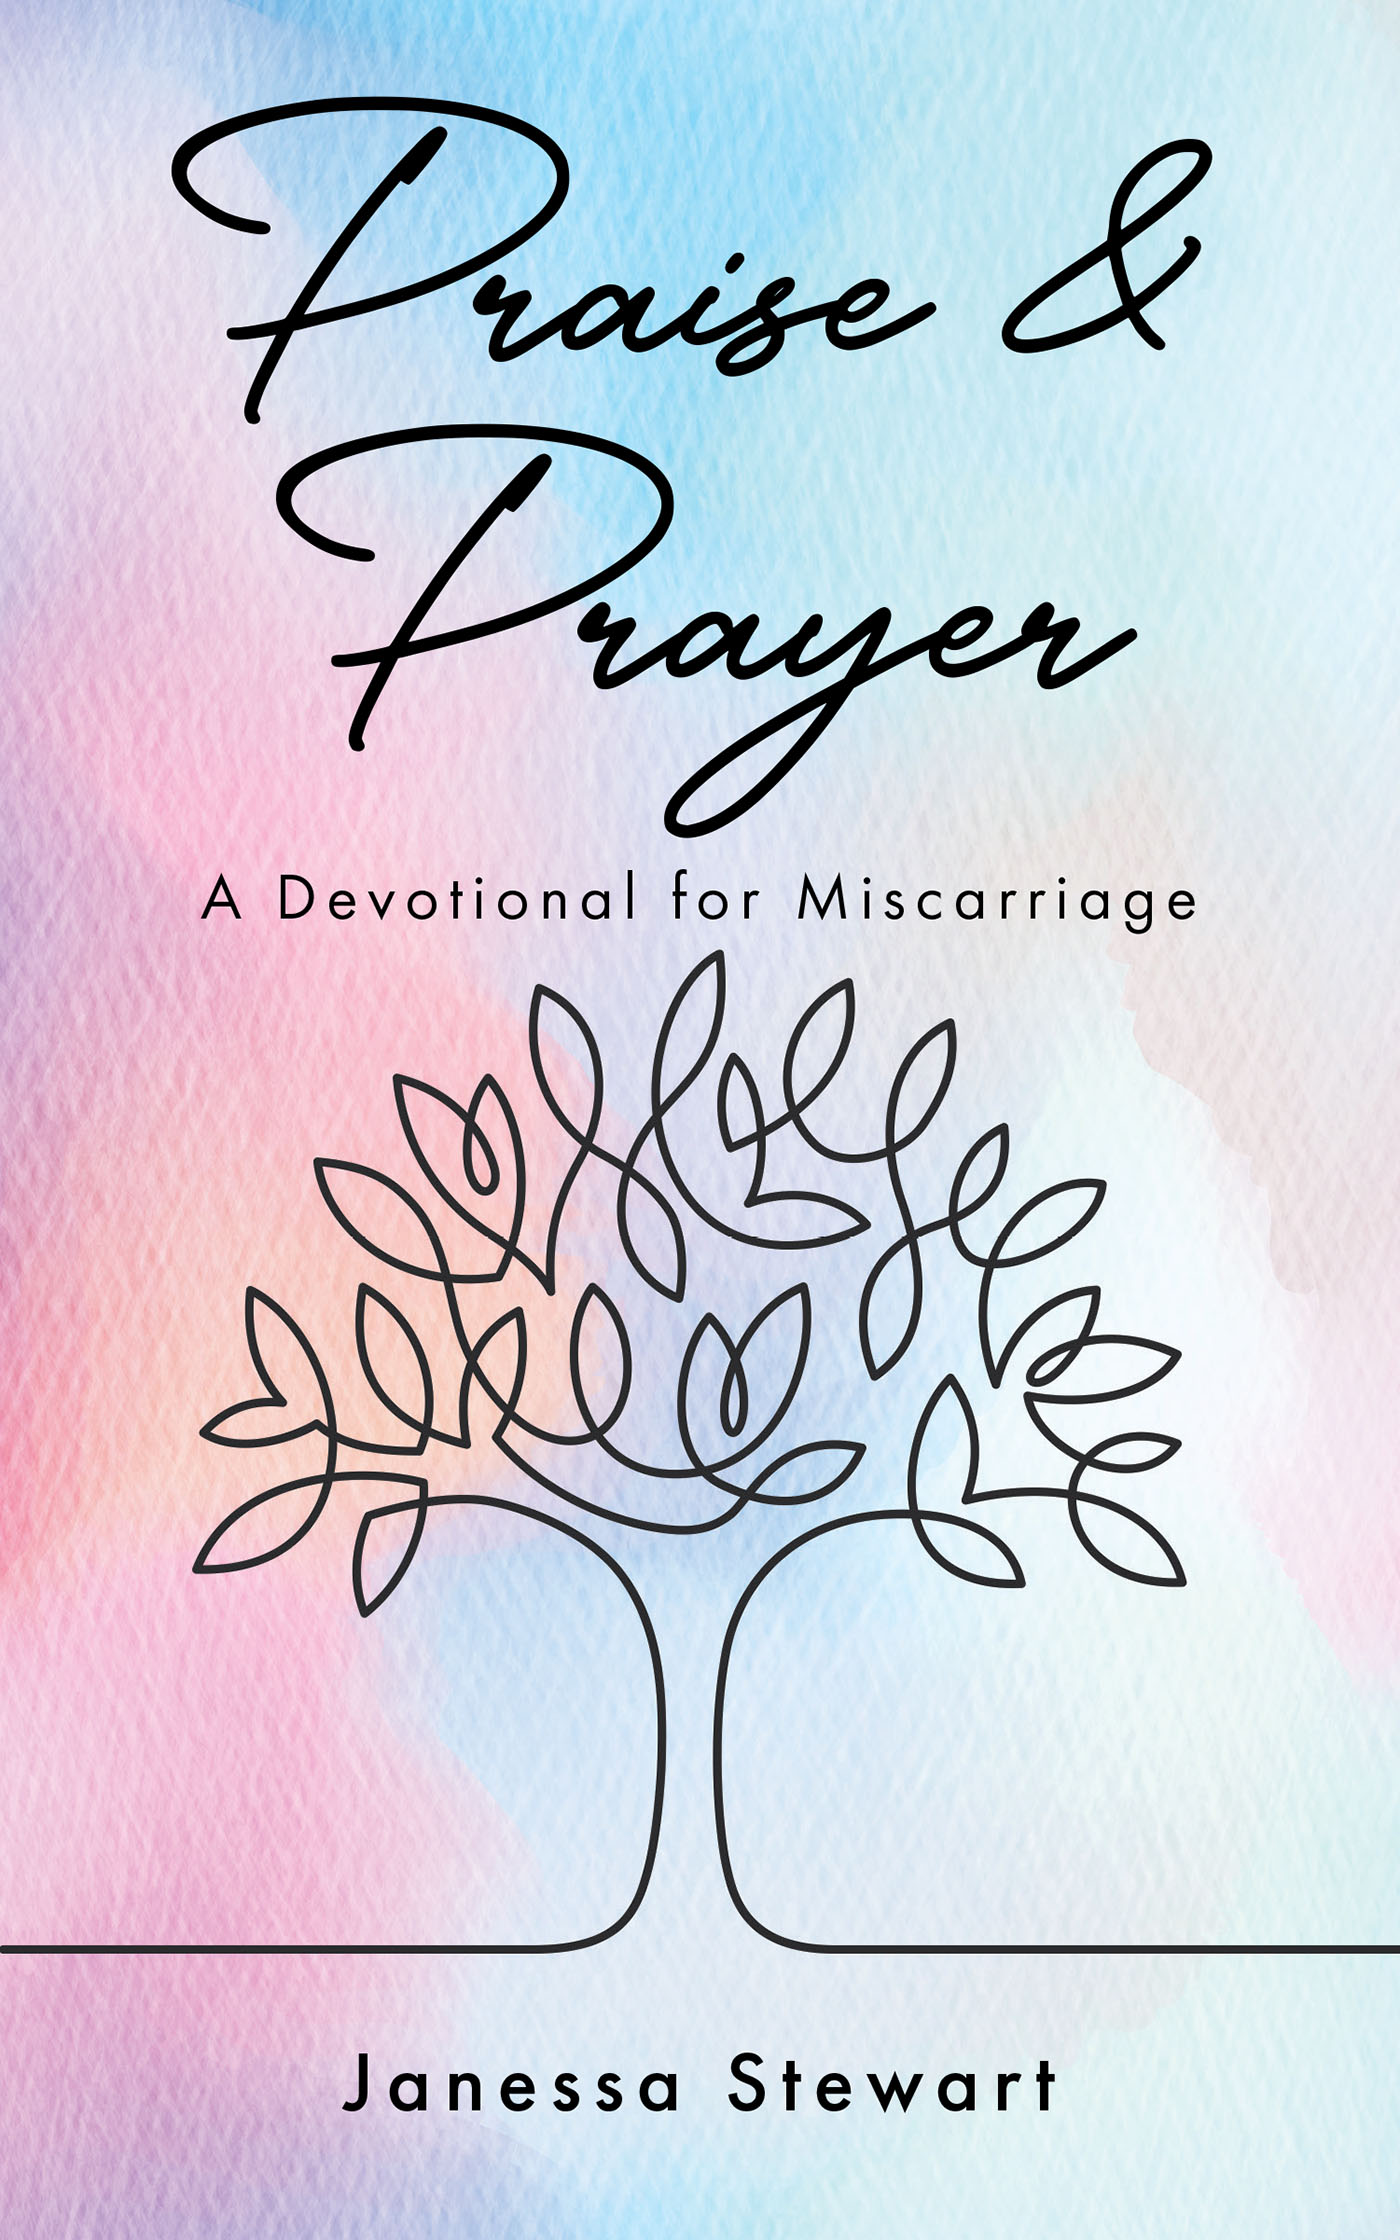 Janessa Stewart’s Newly Released "Praise & Prayer: A Devotional for Miscarriage" is a Comforting Resource for Anyone Navigating a Complex Loss